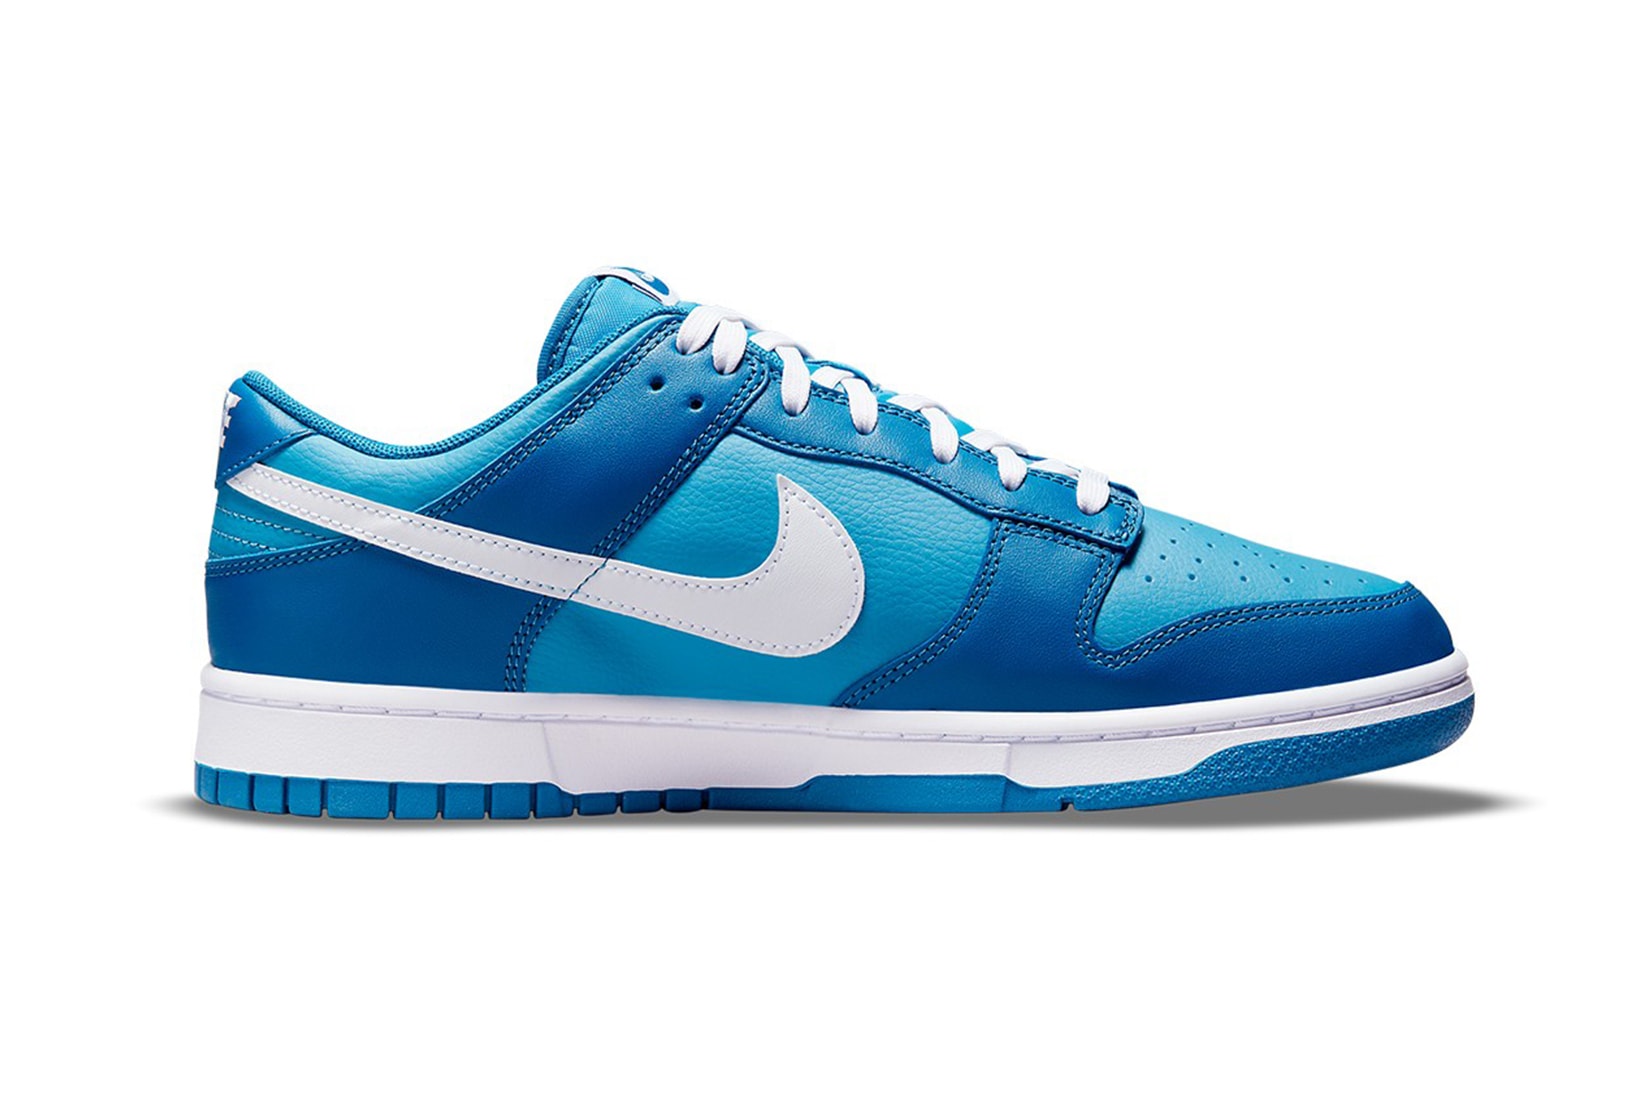 Nike Dunk Low Dark Marina Blue Another Side View